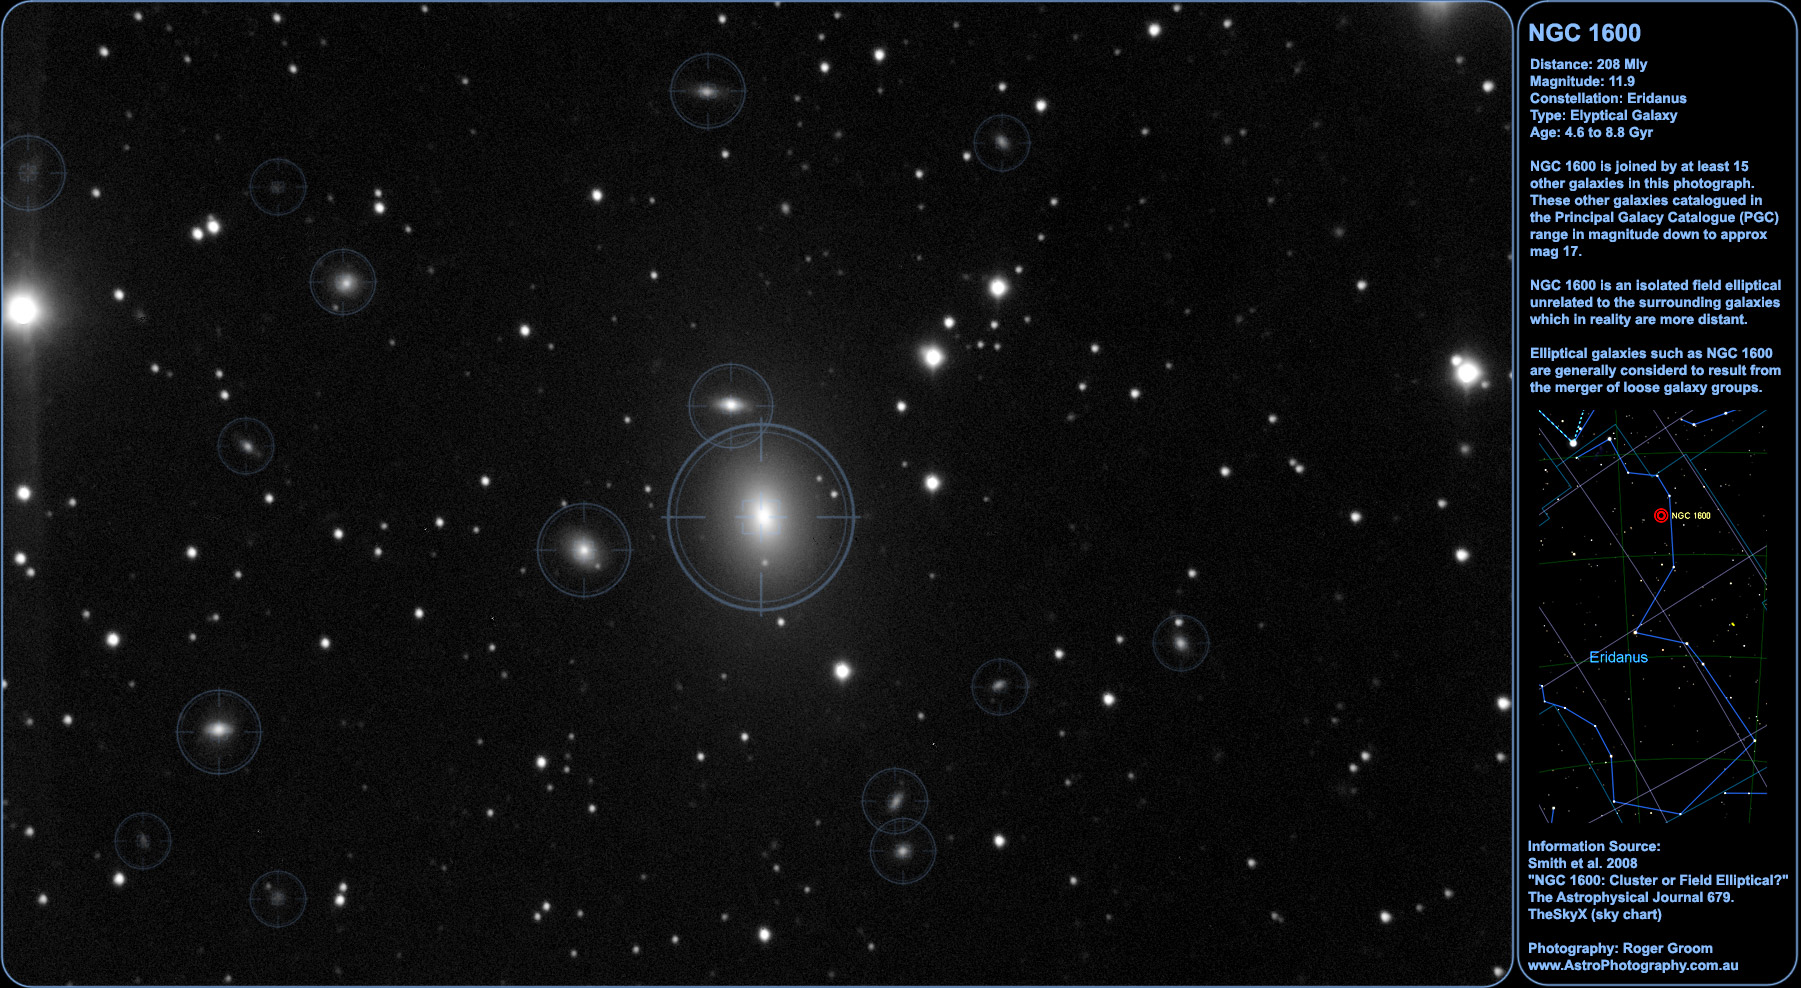 NGC 1600 and other galaxies. 5 x 180 second exposures. 0.84"/pixel scale.